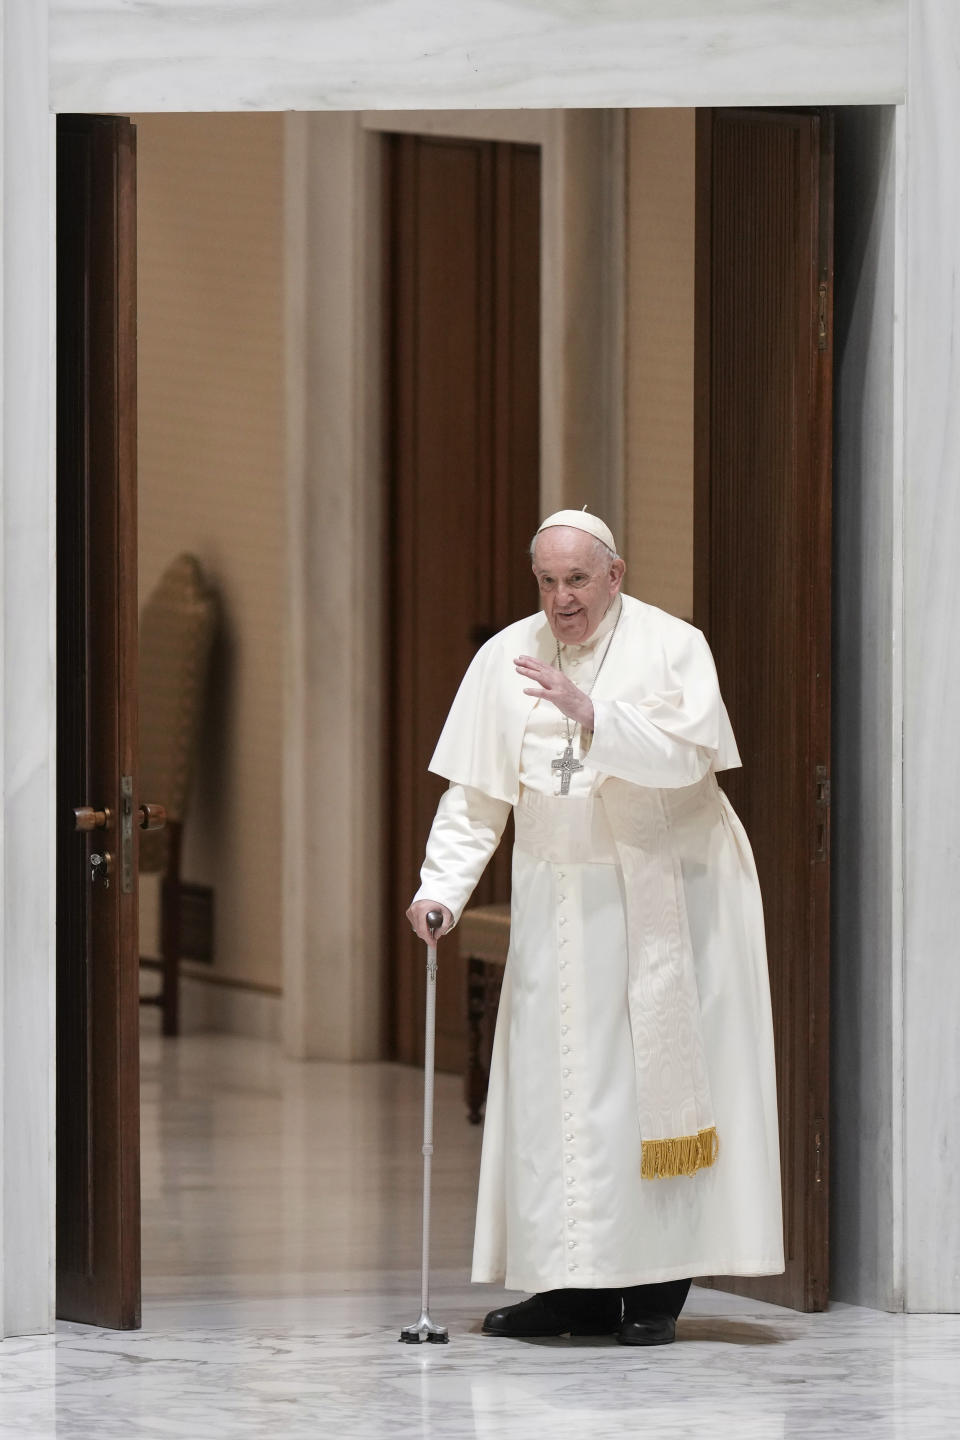 Pope Francis arrives for his weekly general audience in the Pope Paul VI hall at the Vatican, Wednesday, Jan. 4, 2023. (AP Photo/Andrew Medichini)